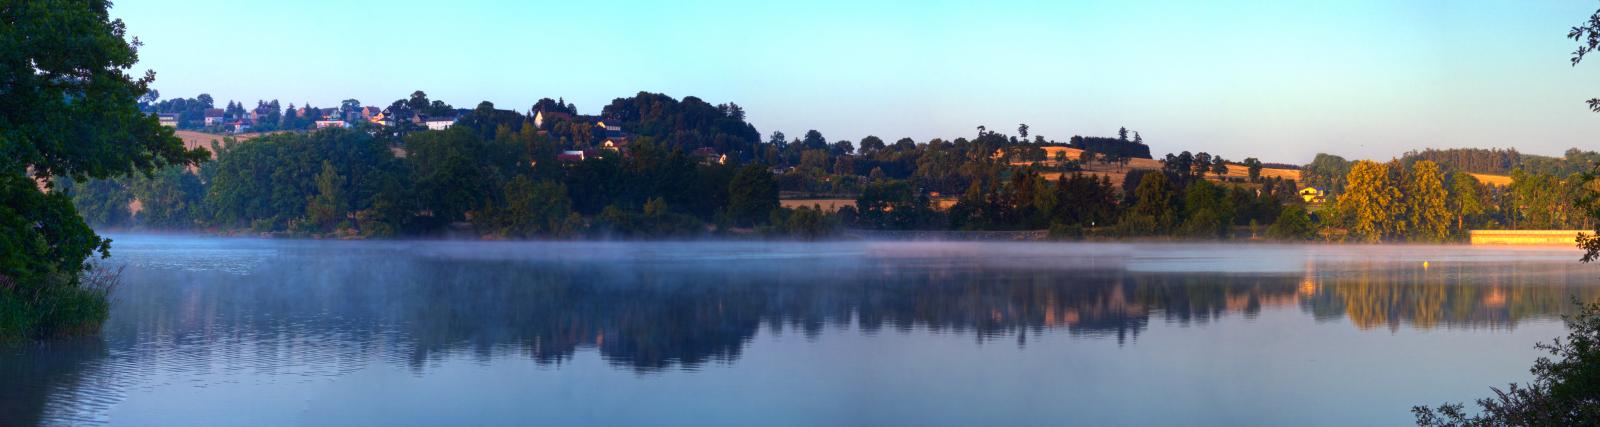 An early morning at the reservoir Pirk